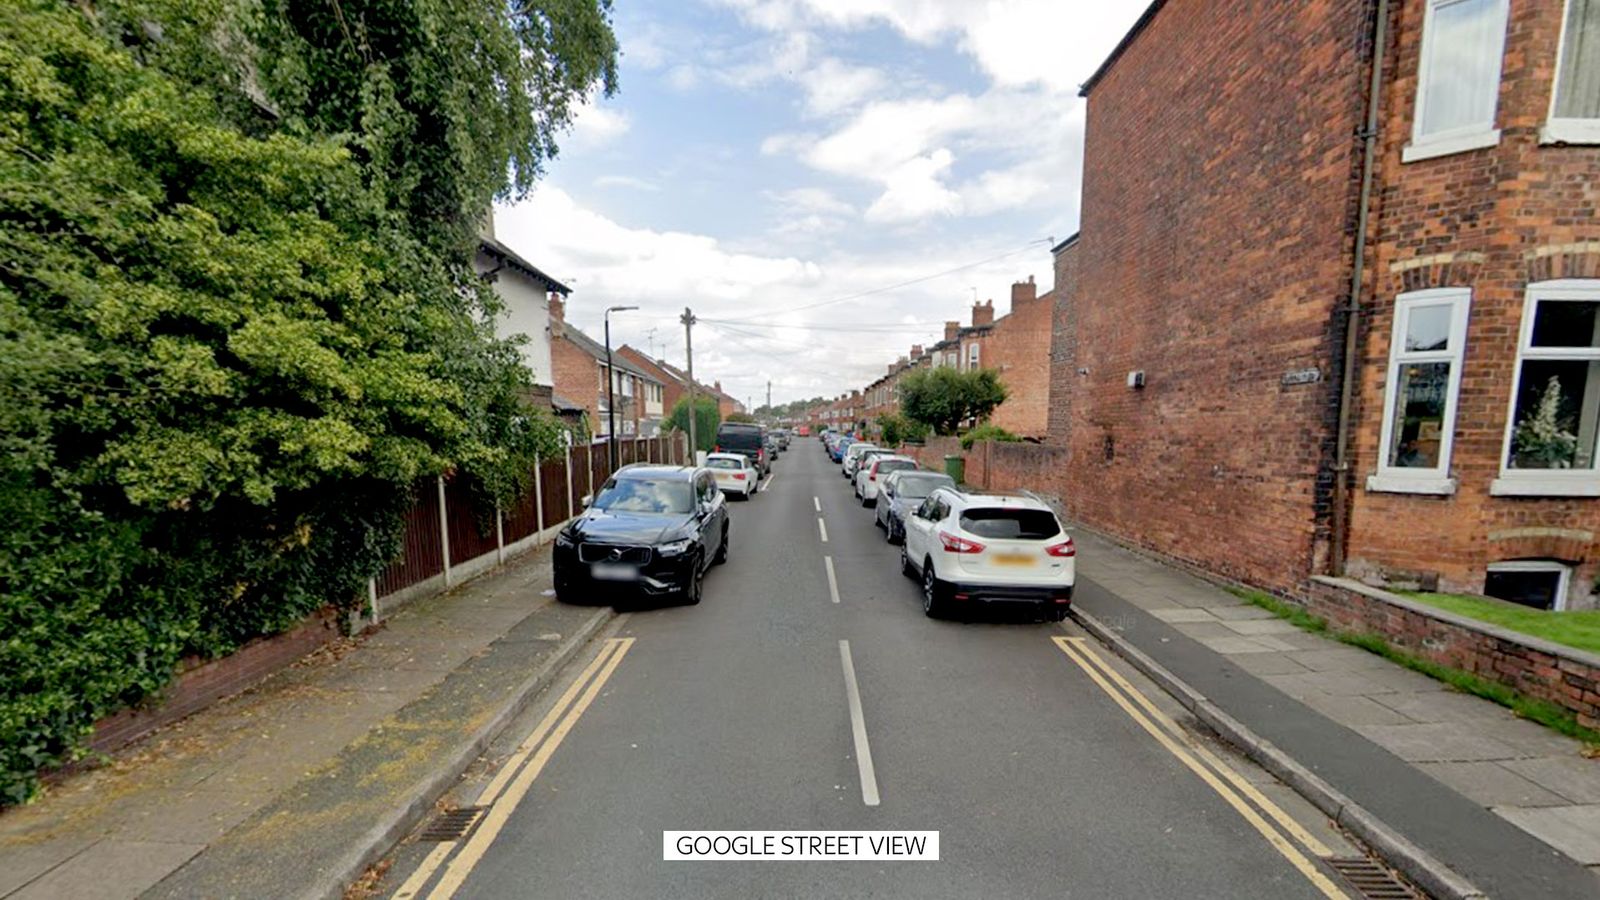 Police officer 'deliberately' run over - as man held for attempted murder